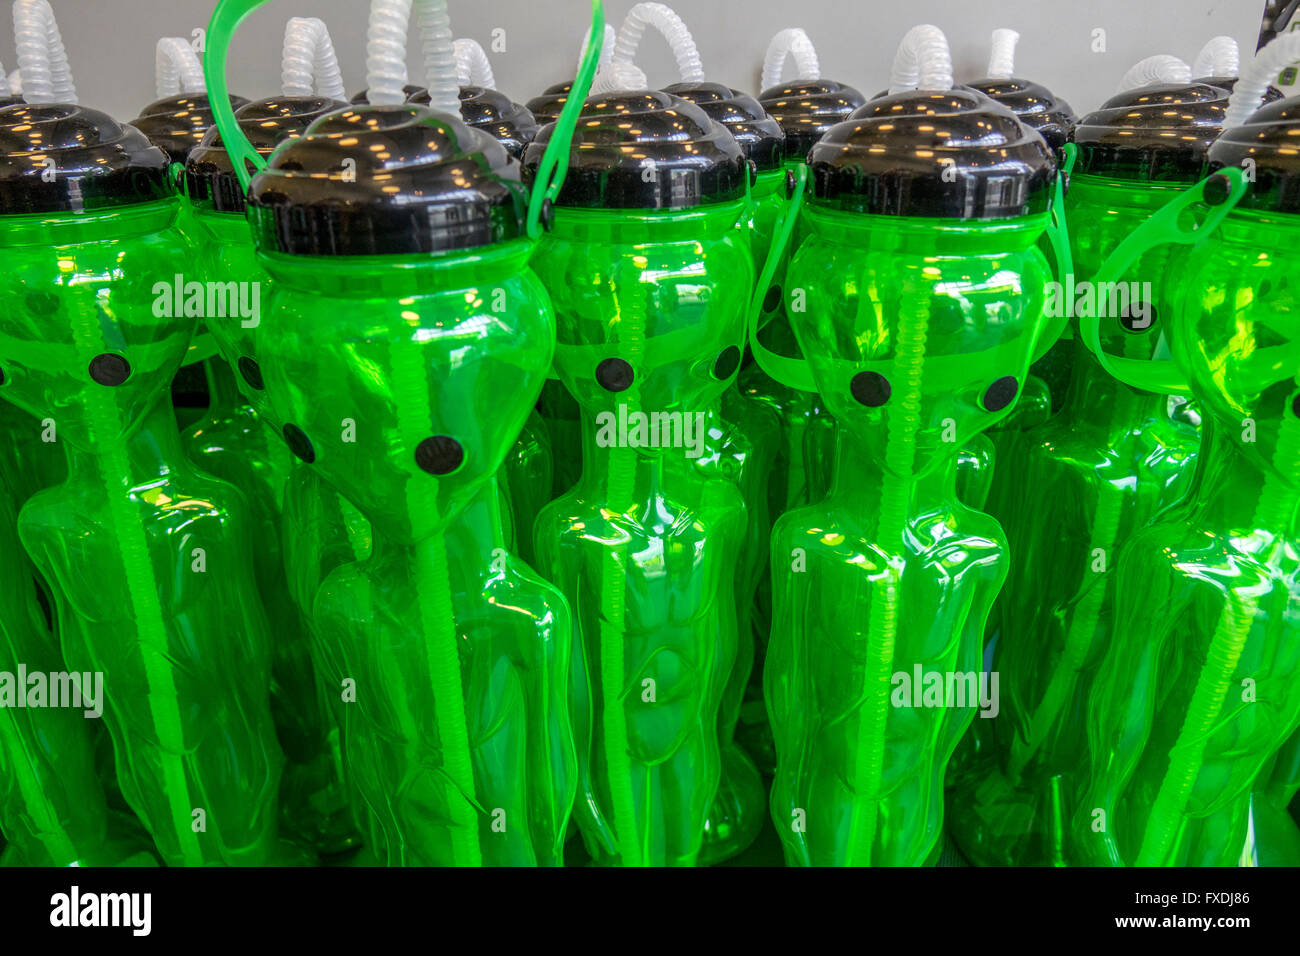 Green Alien Water Bottles For Sale From The Souvenir Store At The Men In Black Theme Park Ride Universal Studios Florida Stock Photo